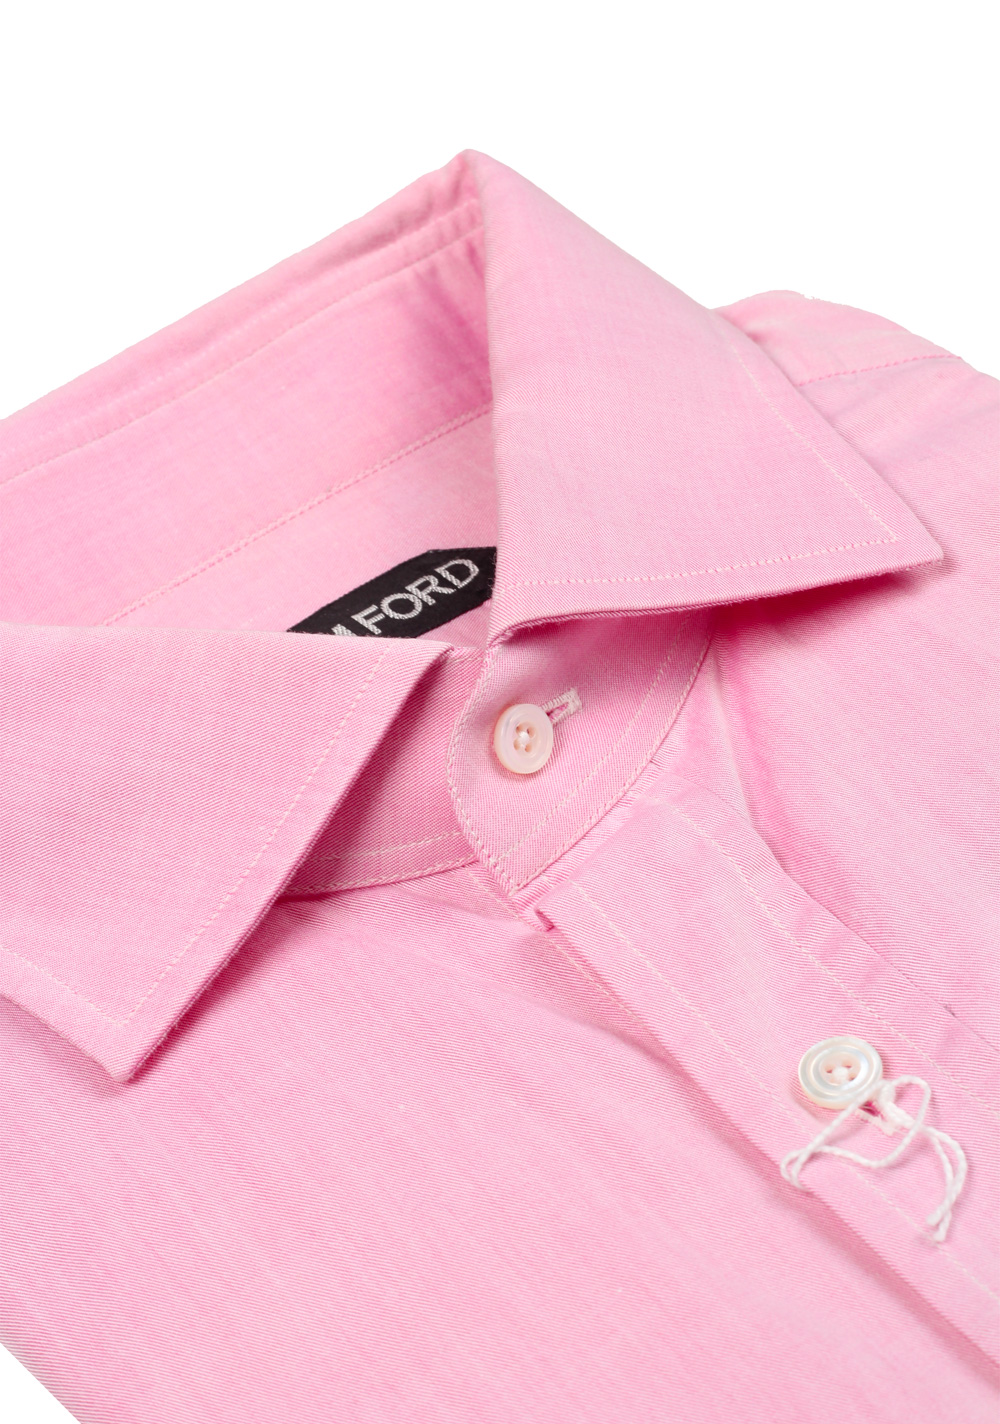 TOM FORD Solid Pink Shirt Size 43 / 17 U.S. | Costume Limité